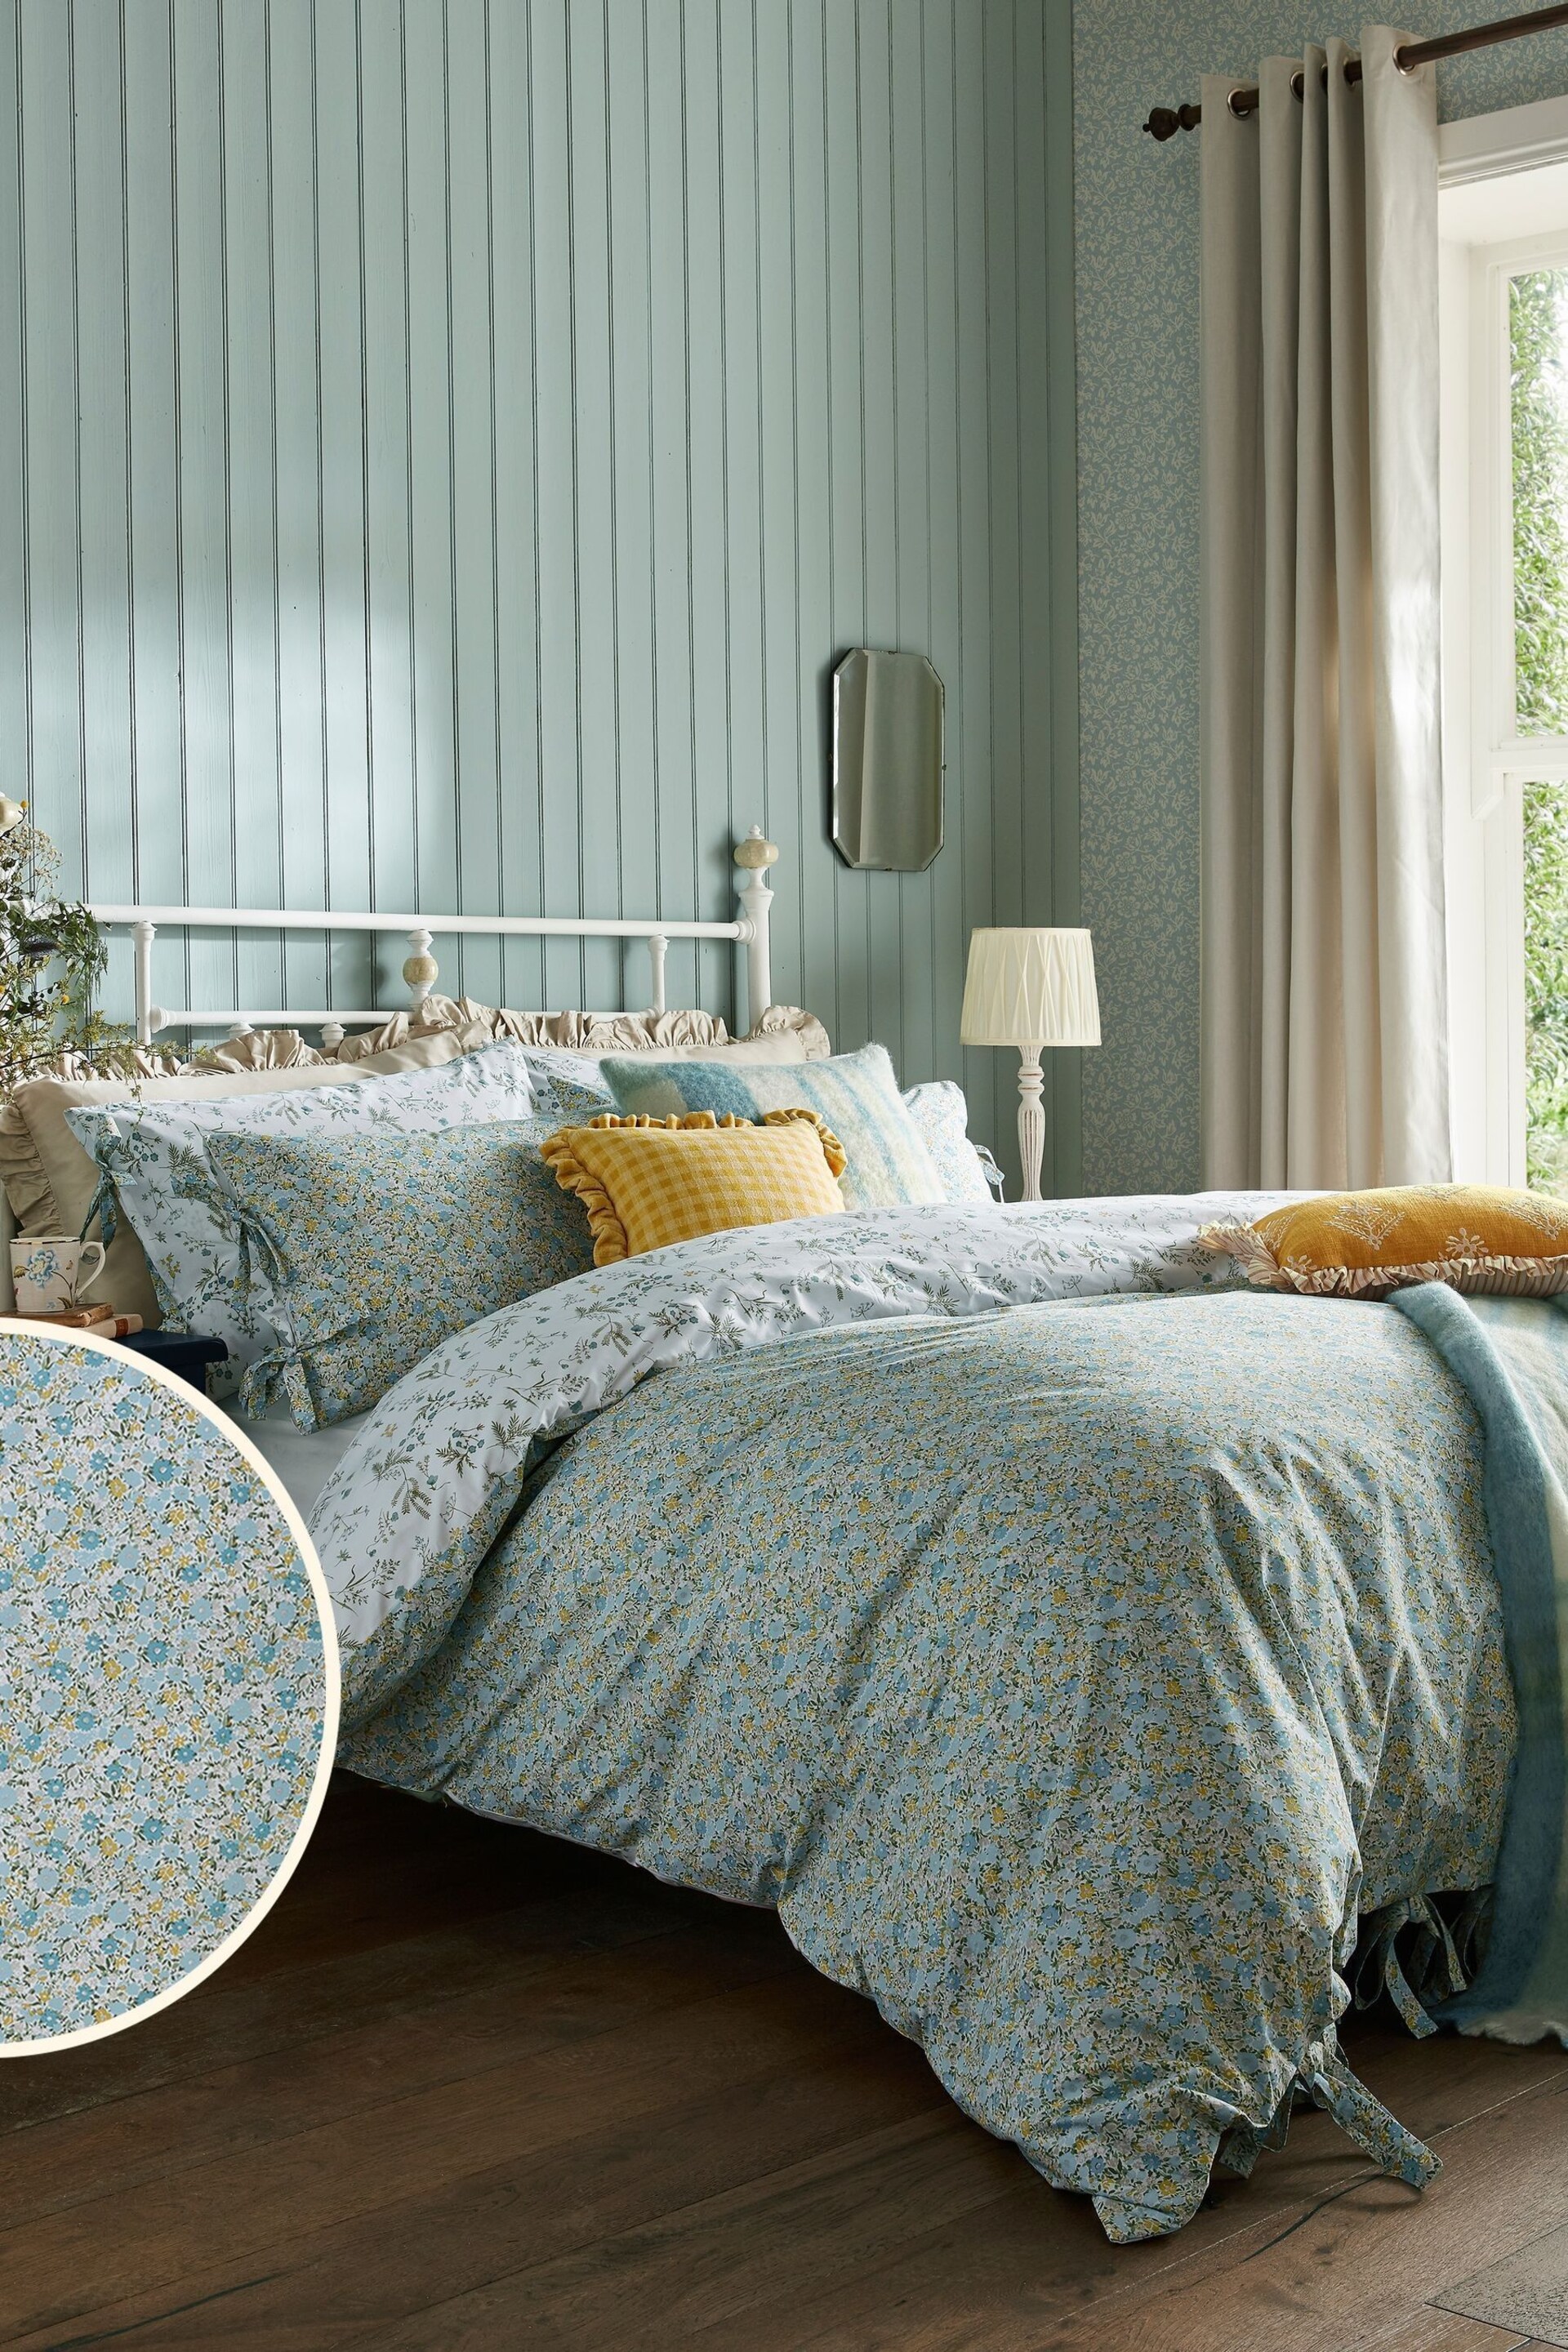 Laura Ashley Newport Blue 200 Thread Count Loveston Duvet Cover and Pillowcase Set - Image 2 of 7